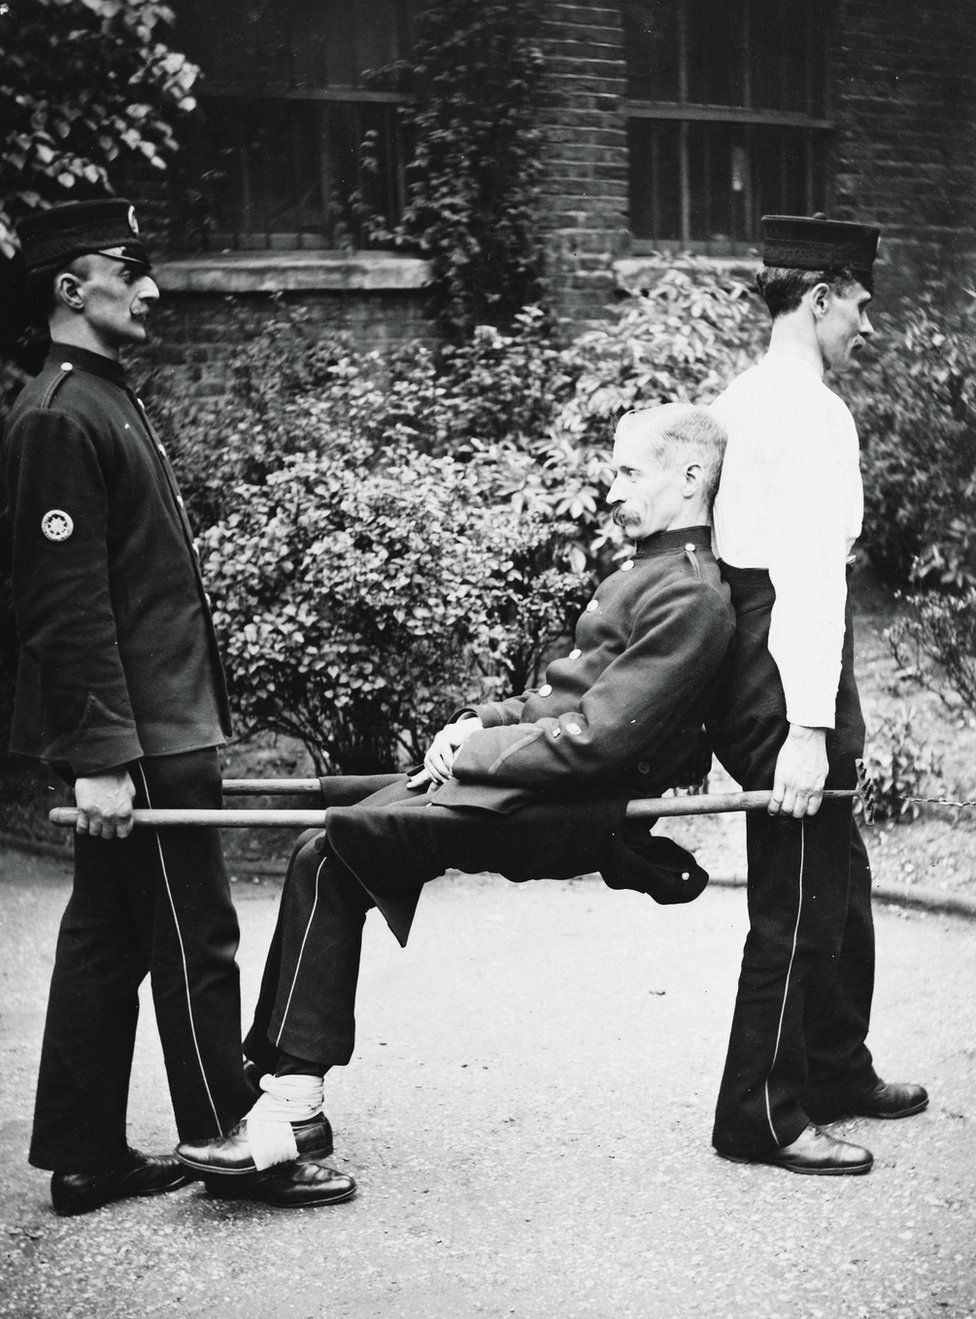 Two men carry another on a stretcher